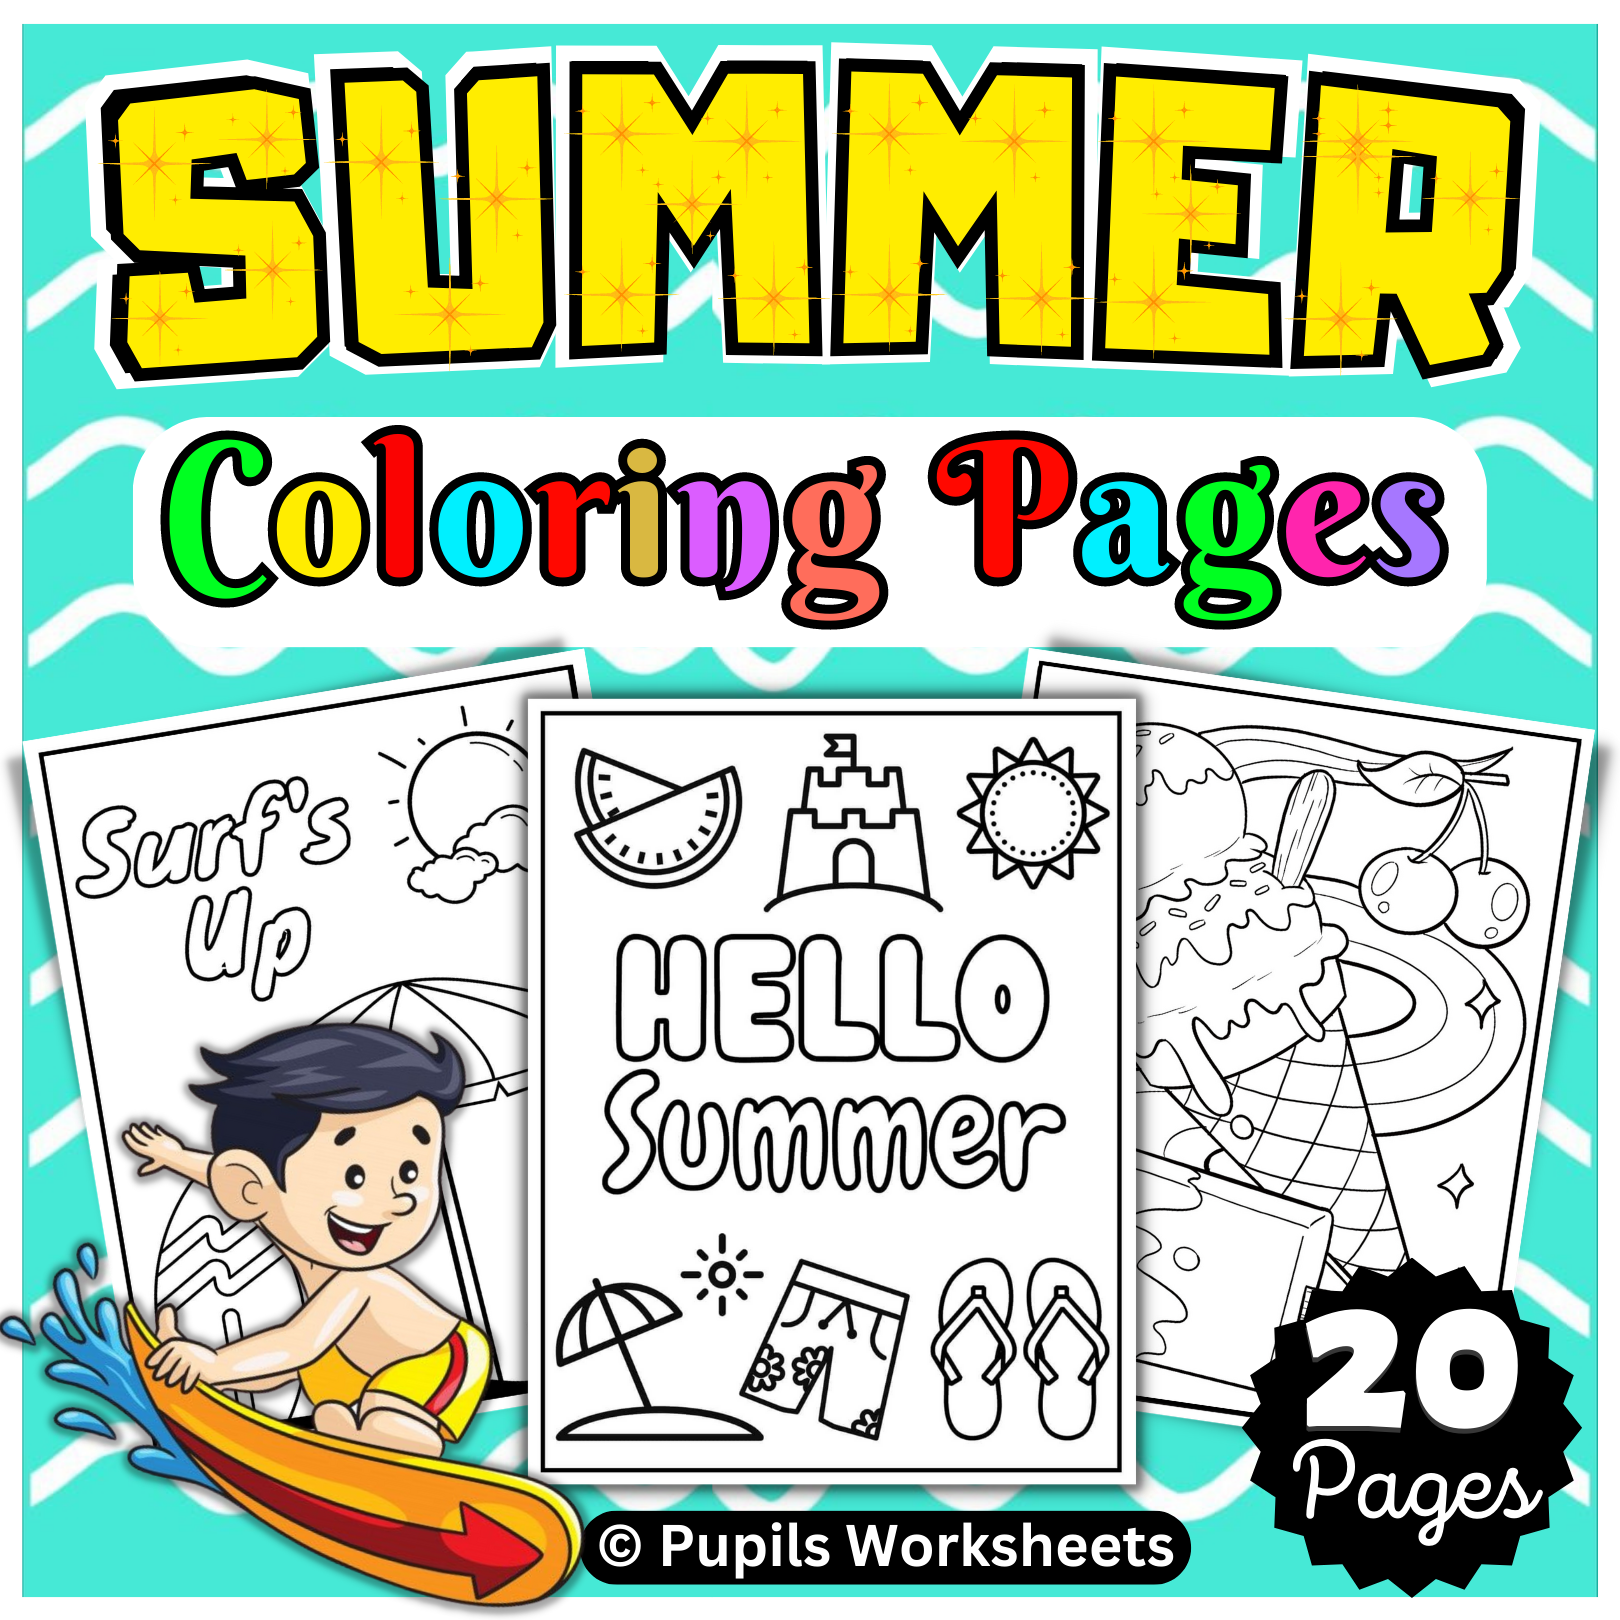 Summer coloring pages for kids fun summer or end of the year activity made by teachers